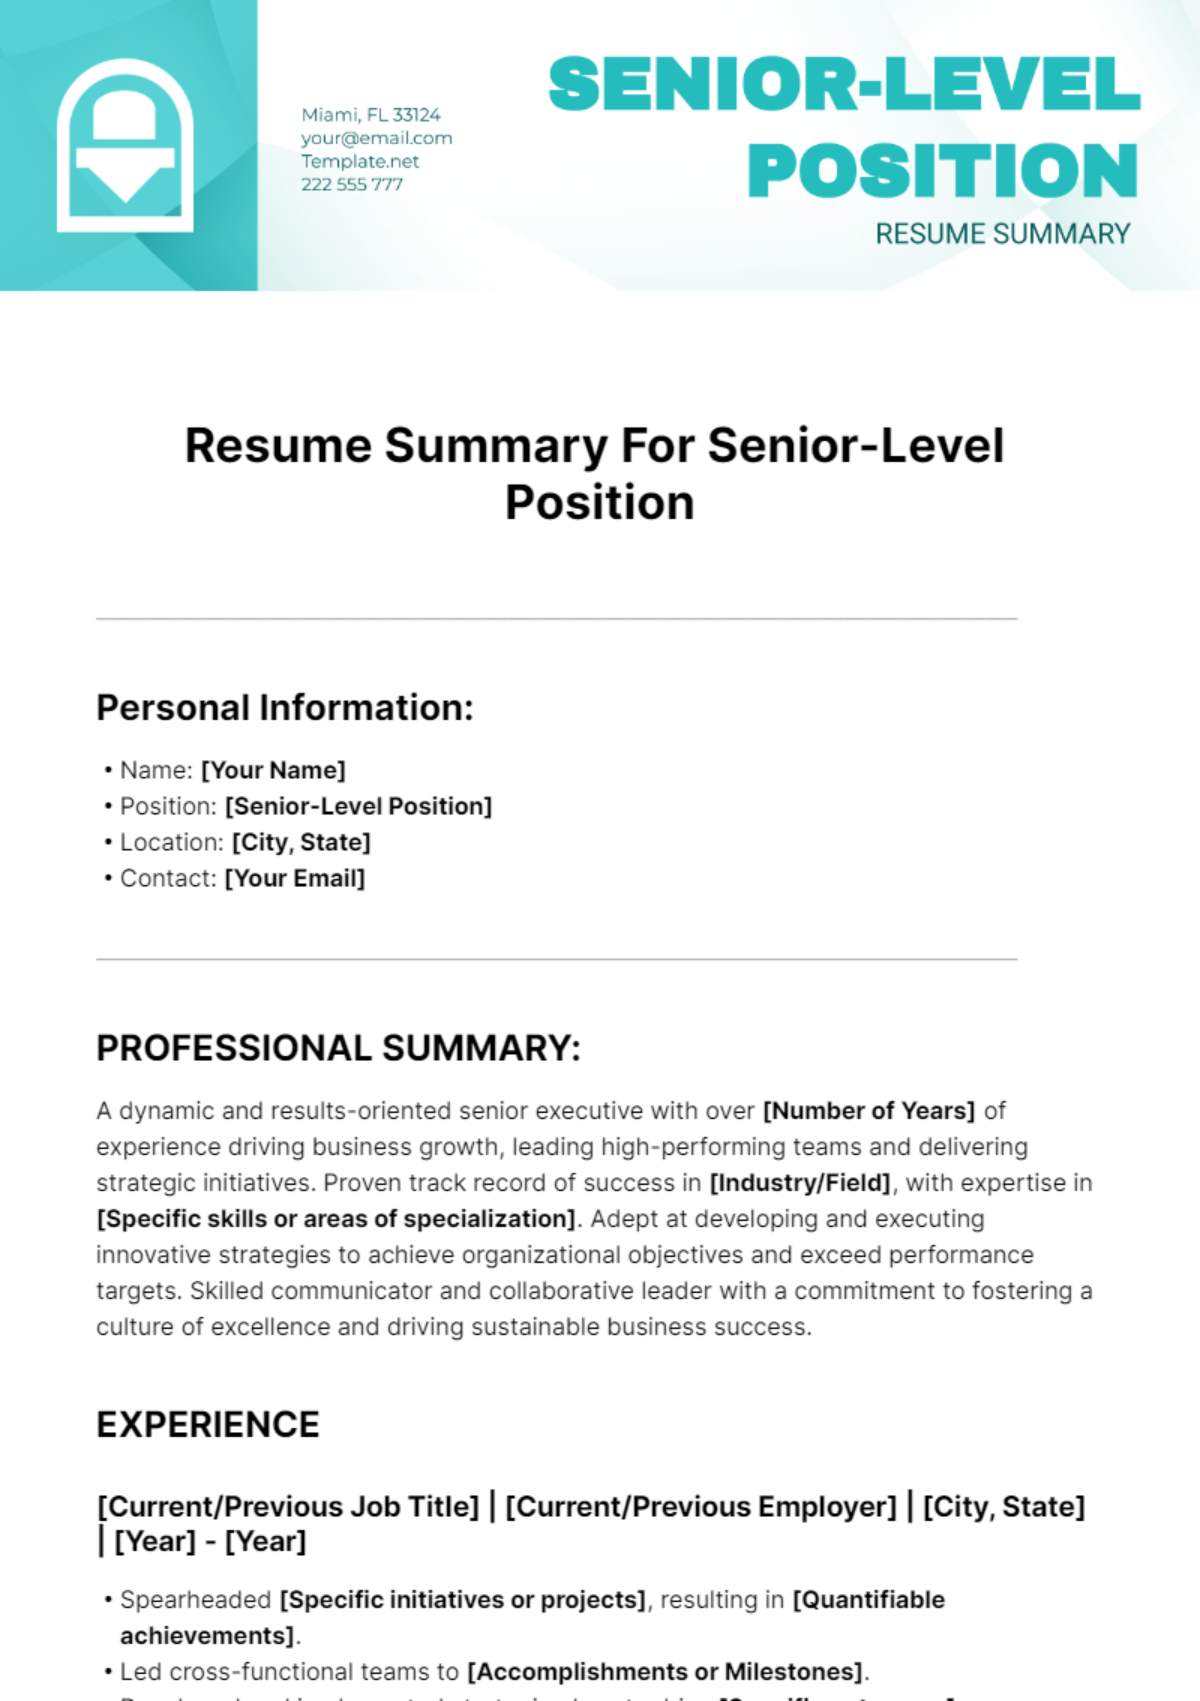 Free Resume Summary For Senior-Level Position Template